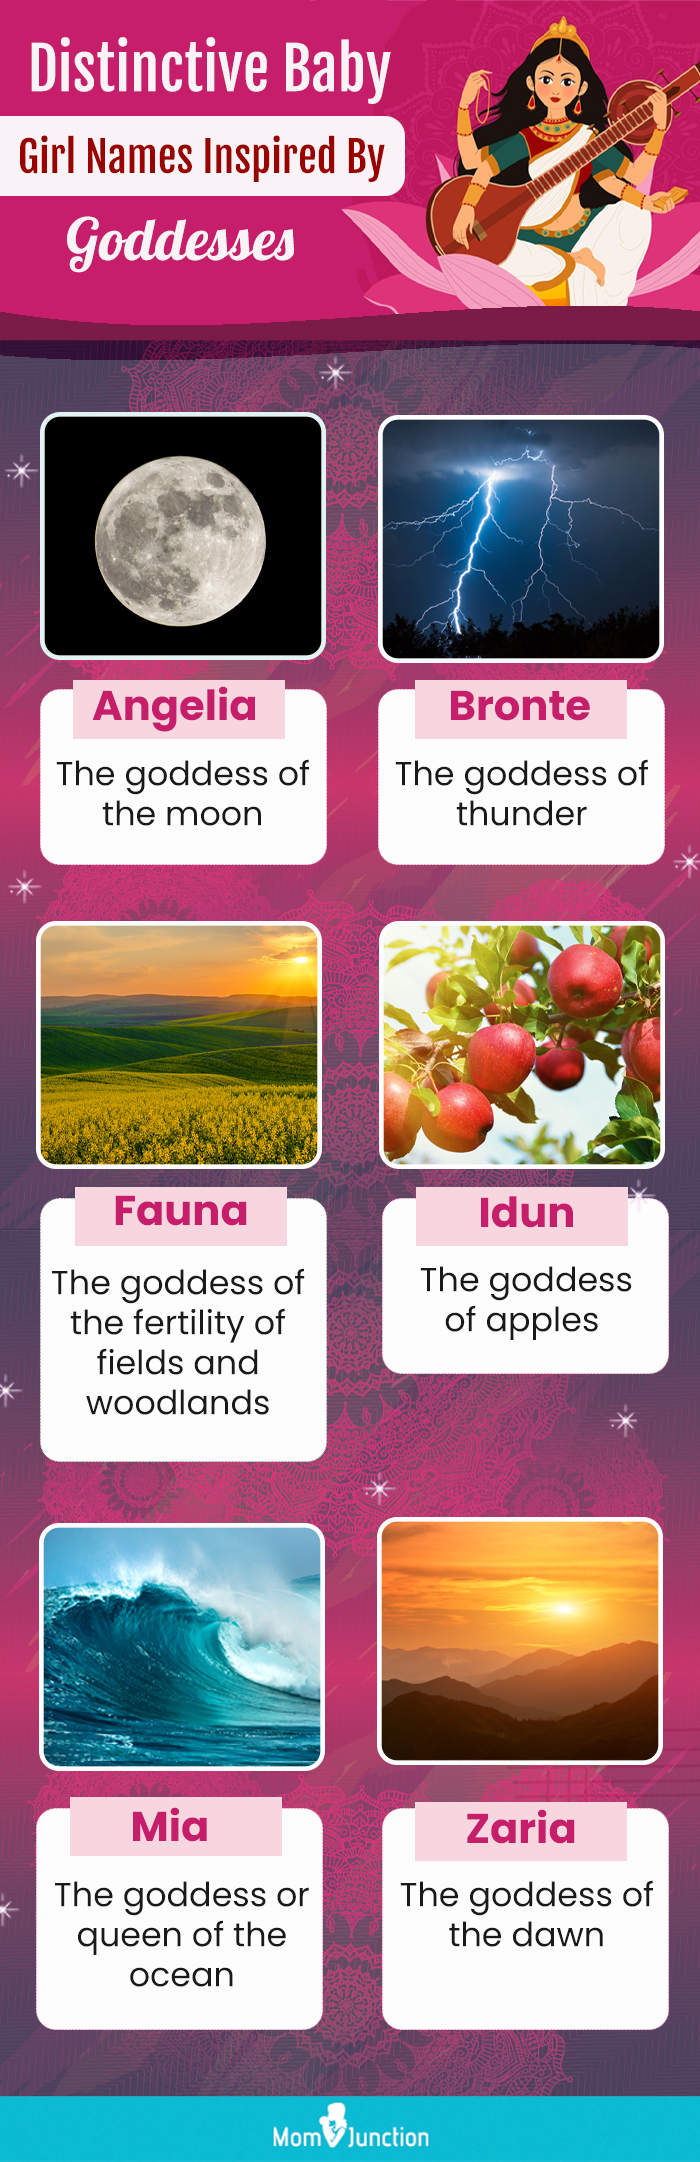 distinctive baby girl names inspired by goddesses (infographic)